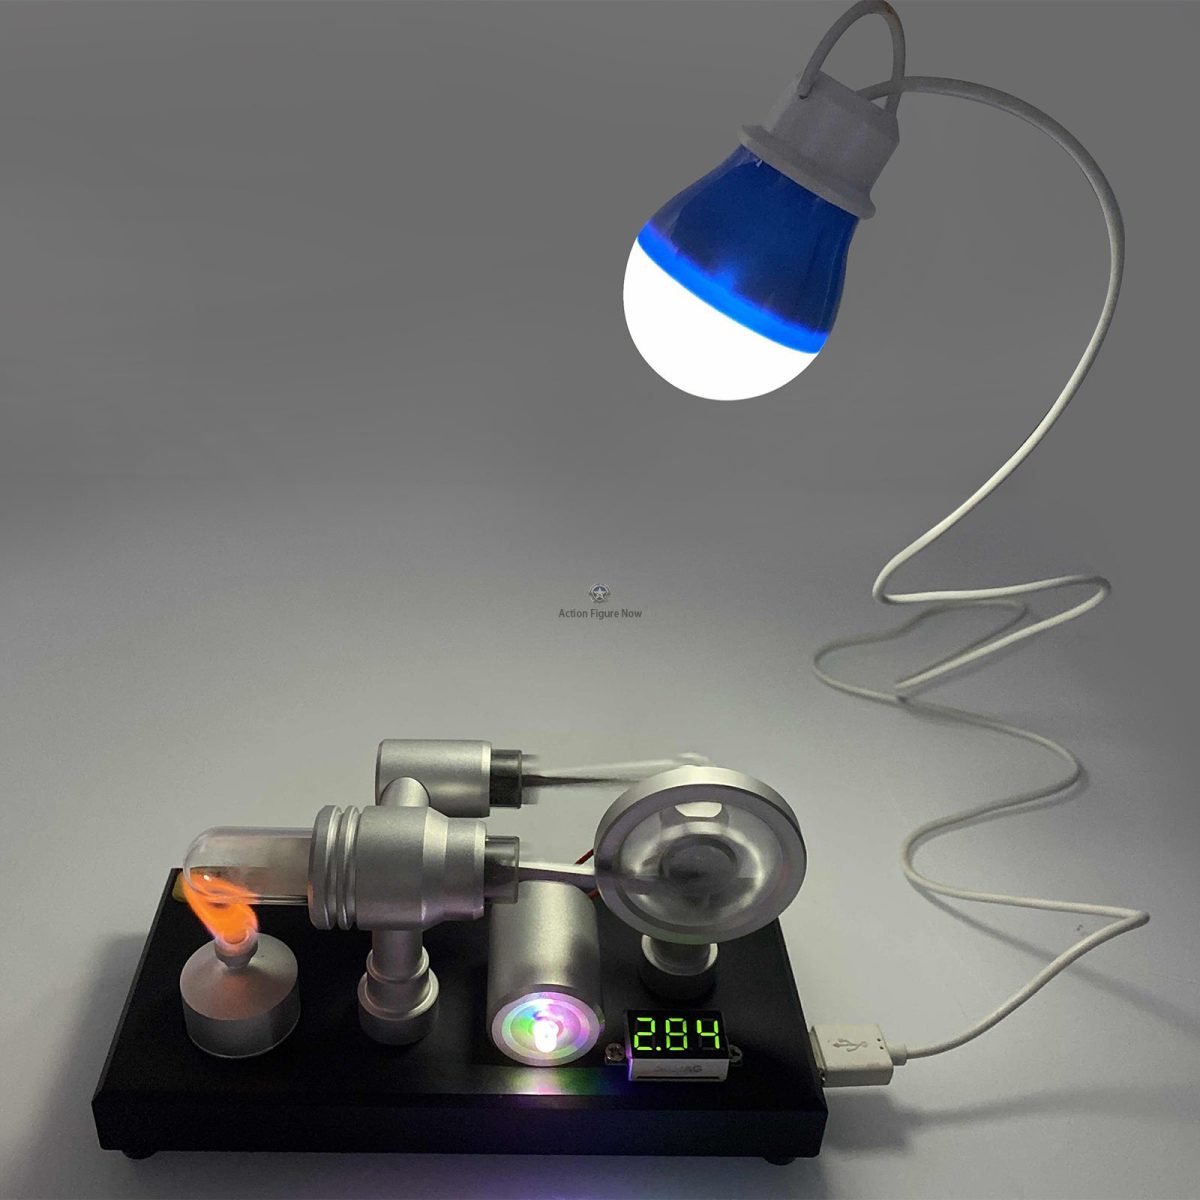 Gamma-Type Hot-Air Stirling Engine Model with LED Lights, Voltage Display, and Digital Features